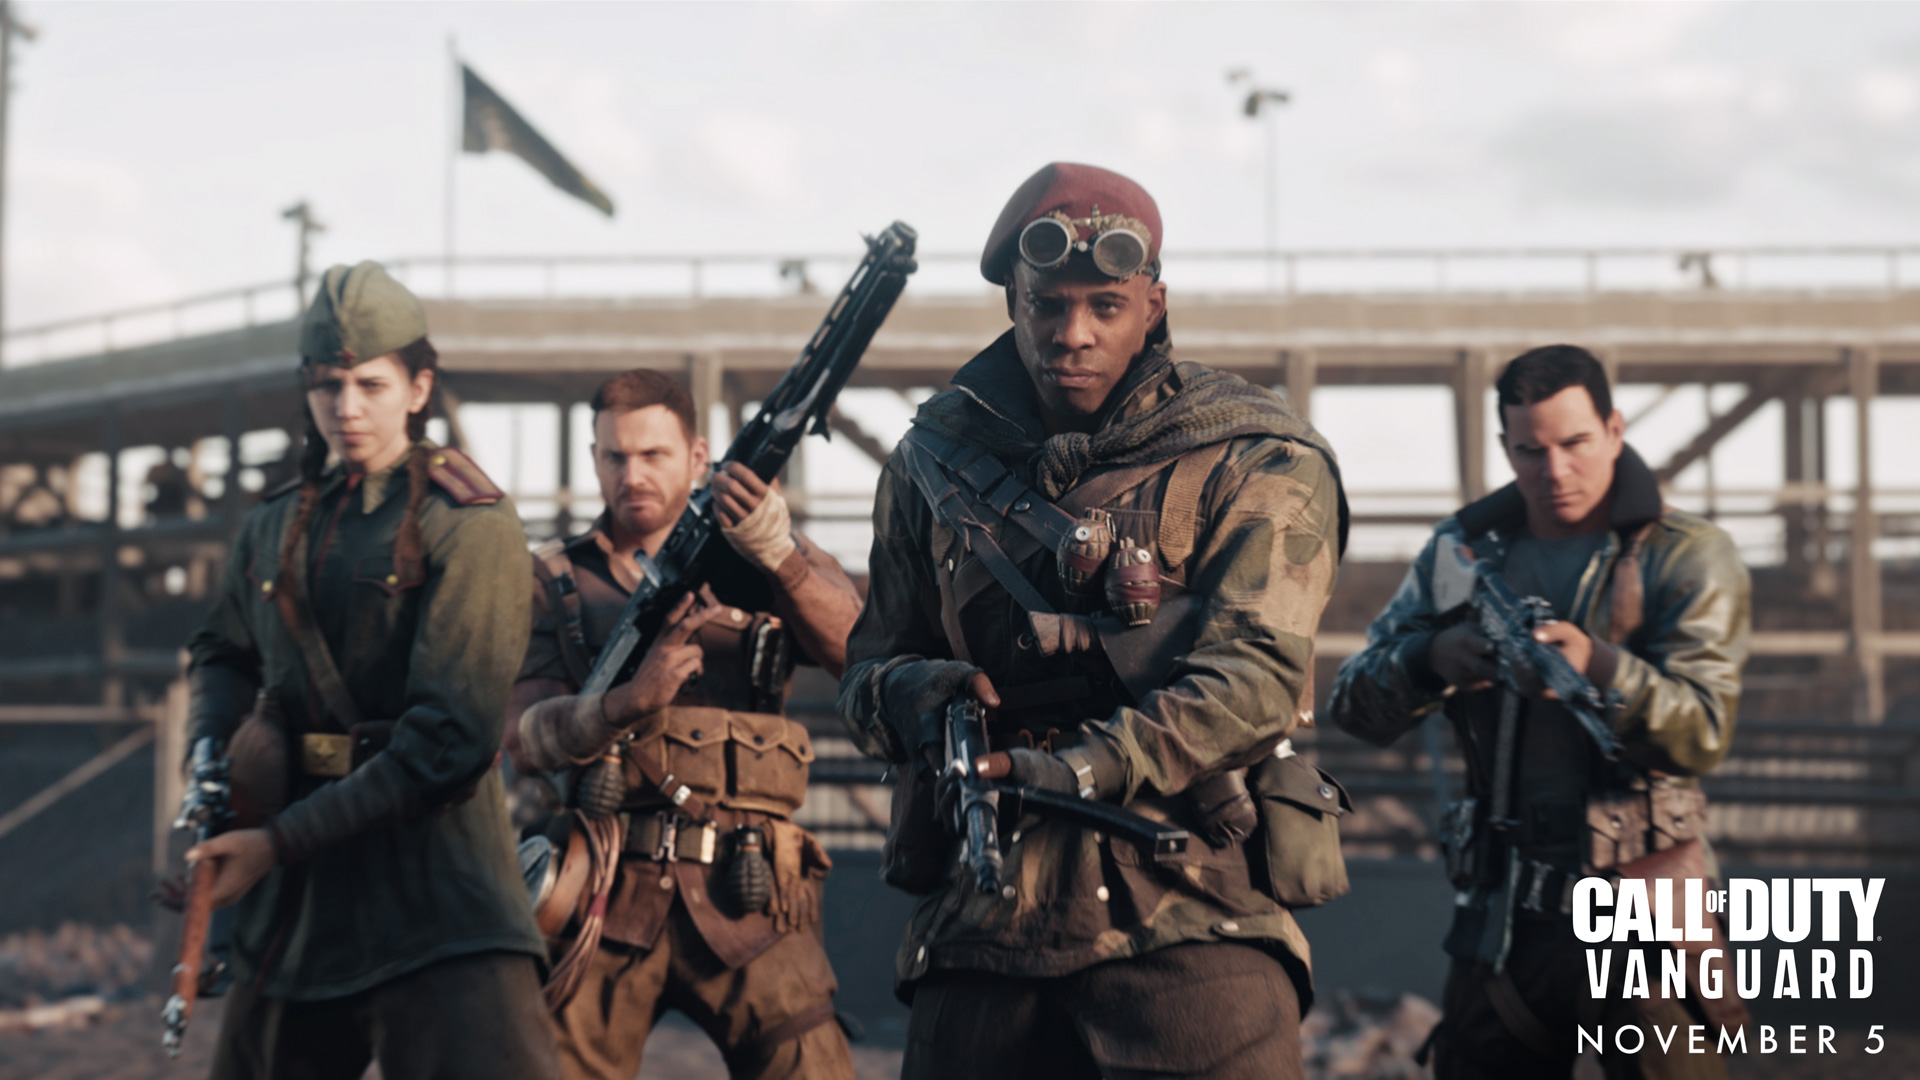 Sledgehammer details what's in Call of Duty: Vanguard's beta, including what's been changed since the alpha